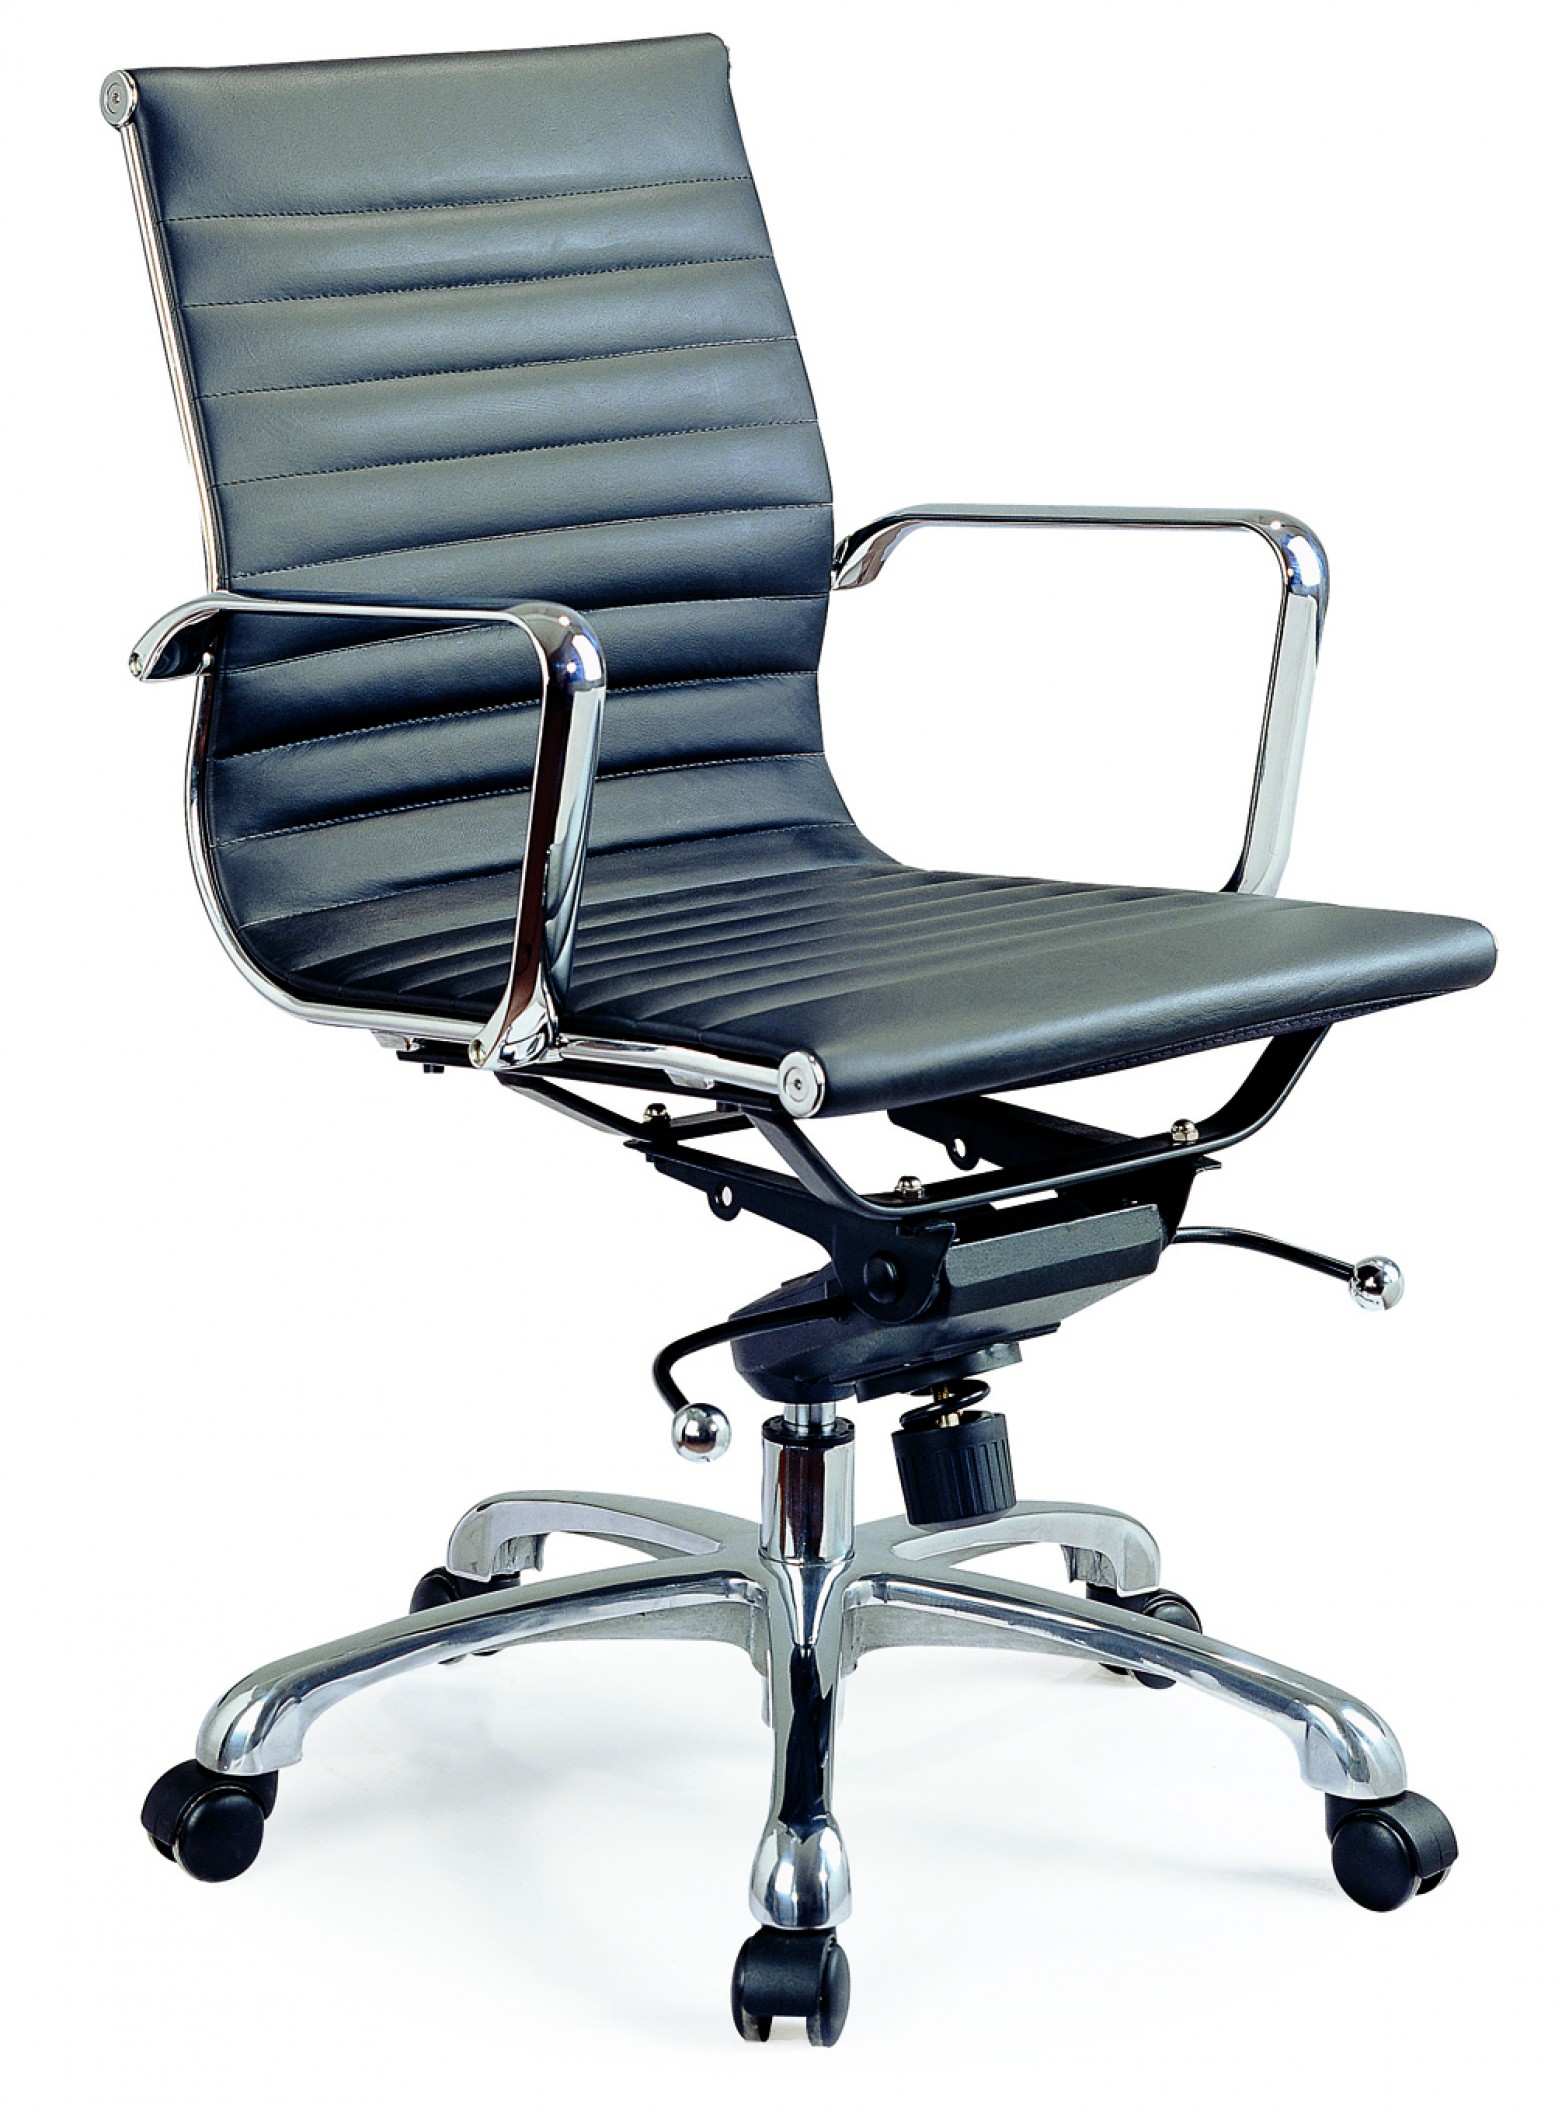 Comfy Low Back Office Chair, Black by J&M Furniture